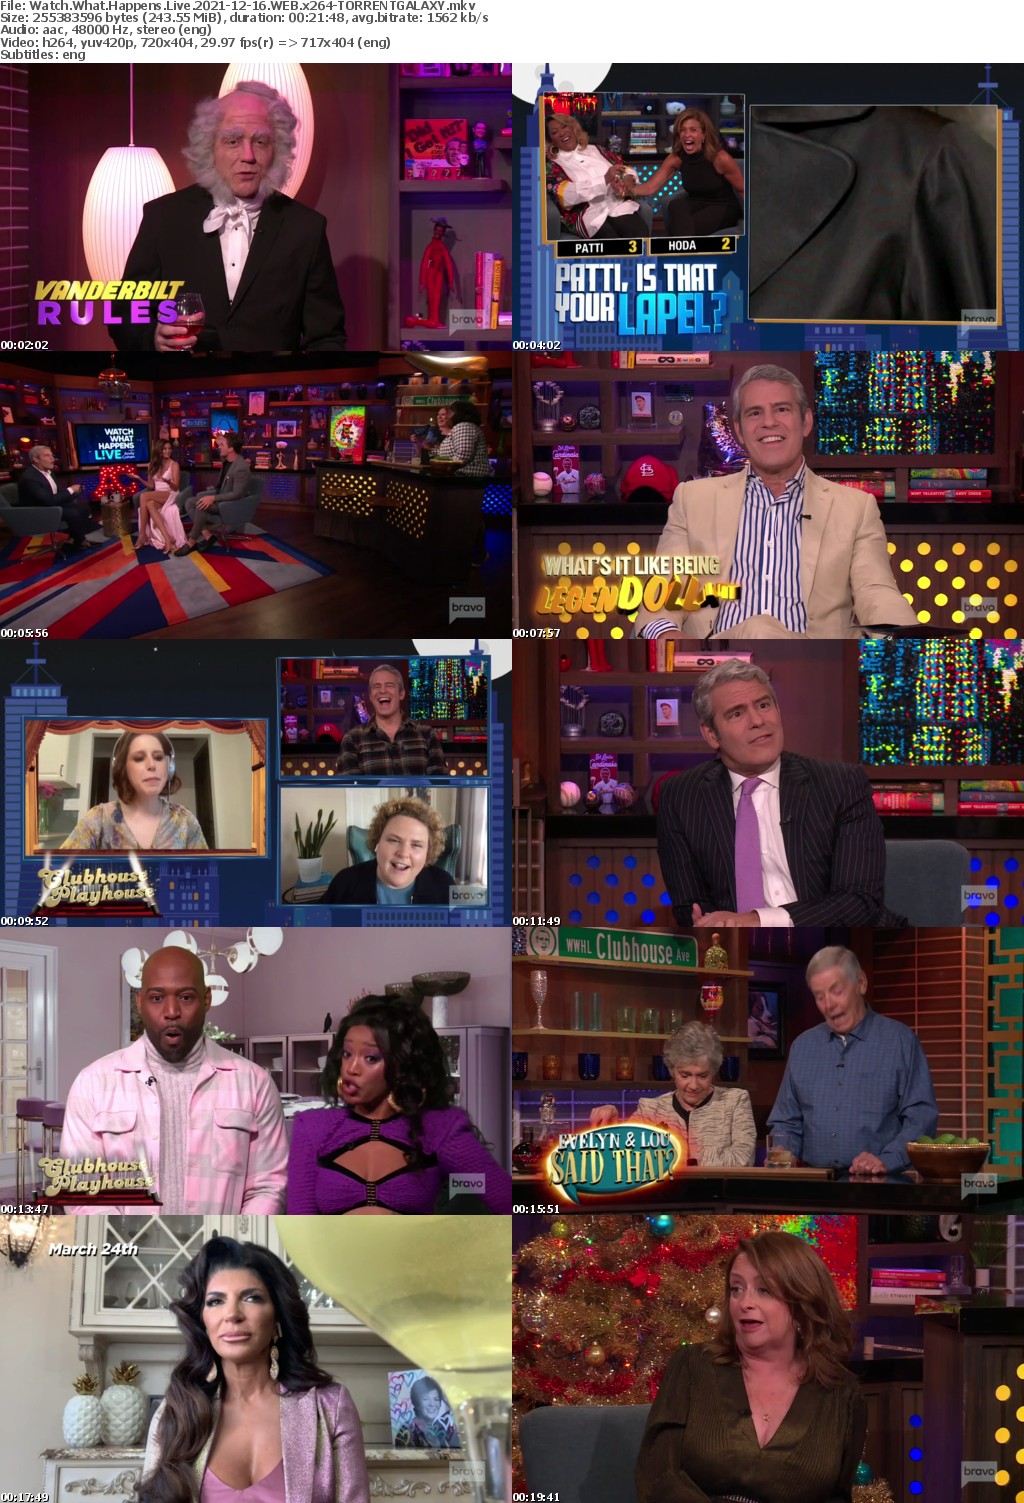 Watch What Happens Live 2021-12-16 WEB x264-GALAXY